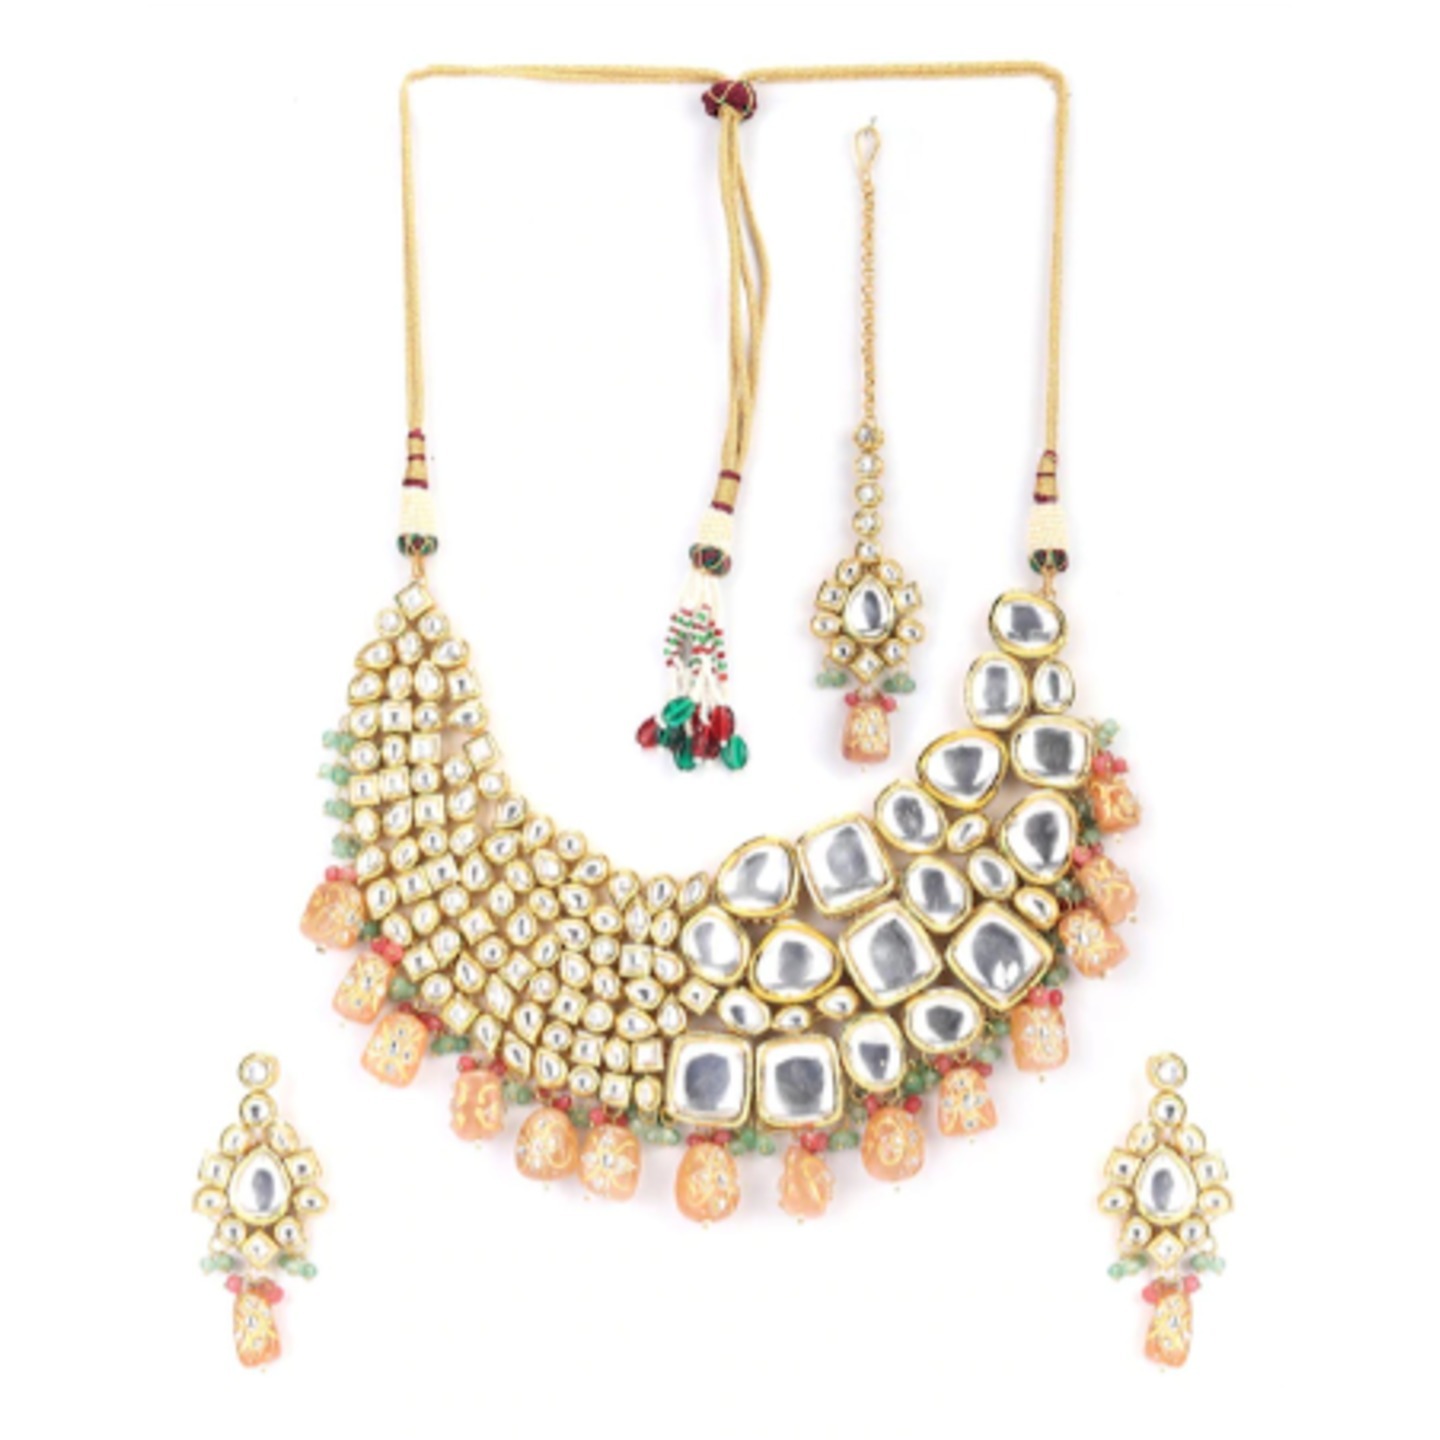 Gold-Plated White & Peach Kundan-Studded & Pearl Beaded Necklace Set 